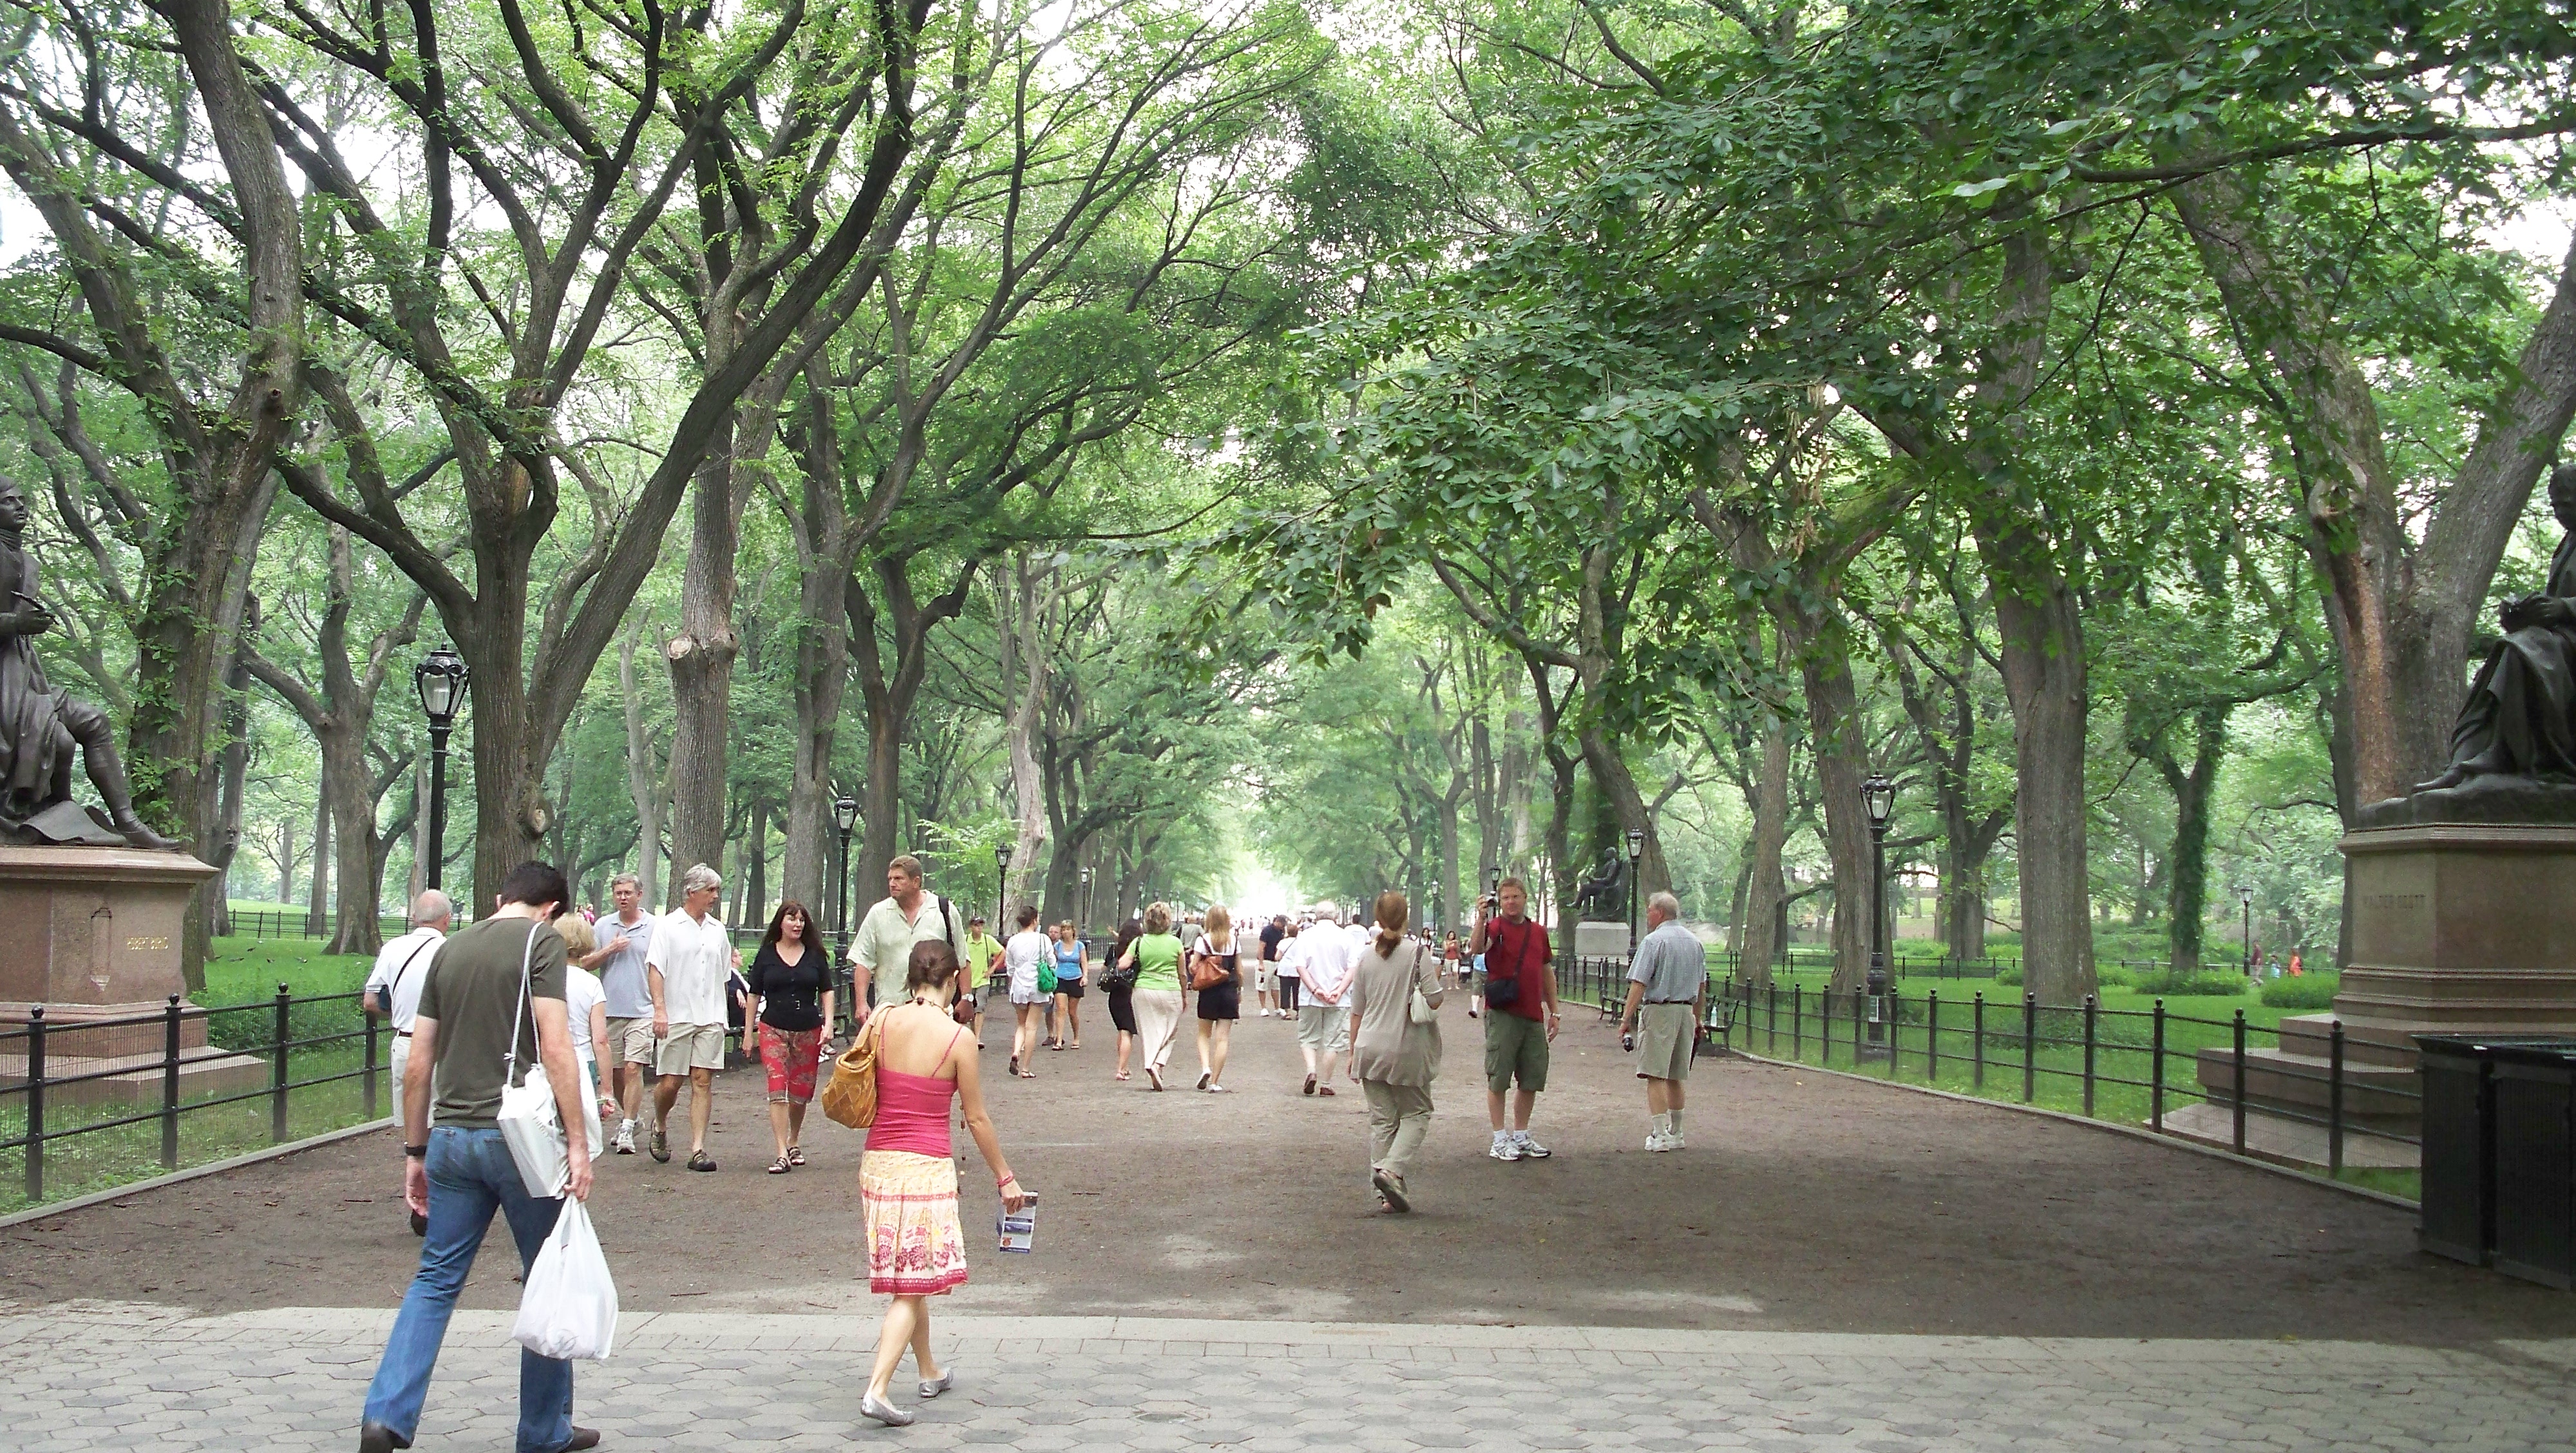 Walk through central park to get in extra steps